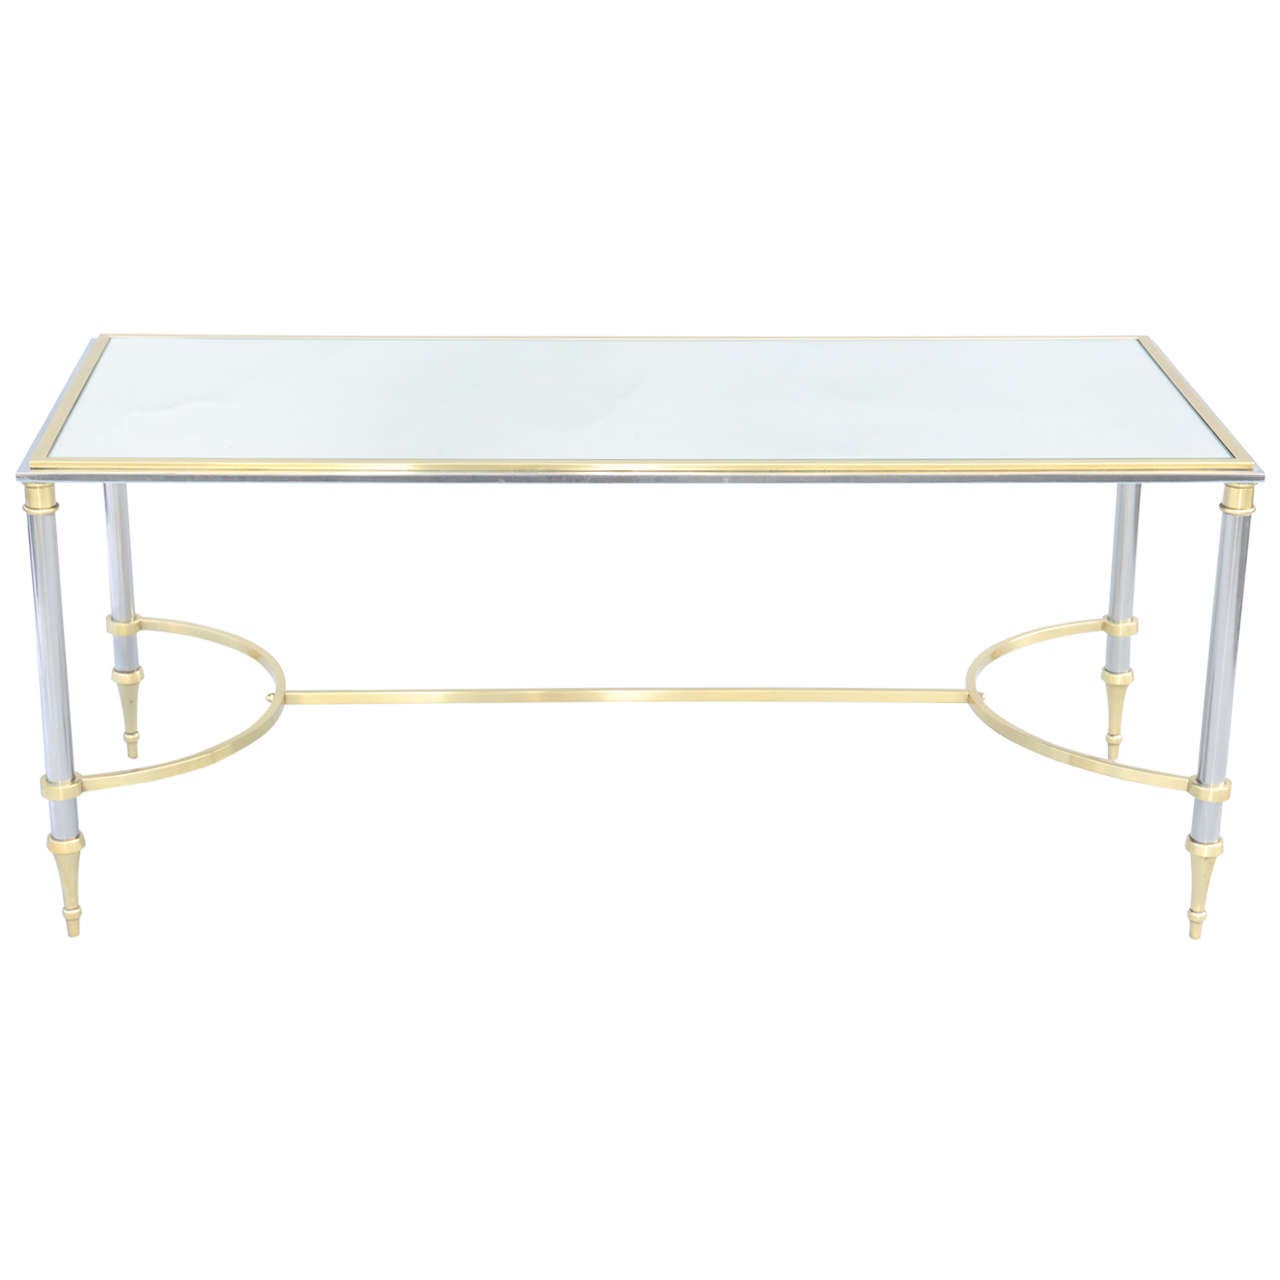 Jansen Style Coffee Table with Mirrored Top